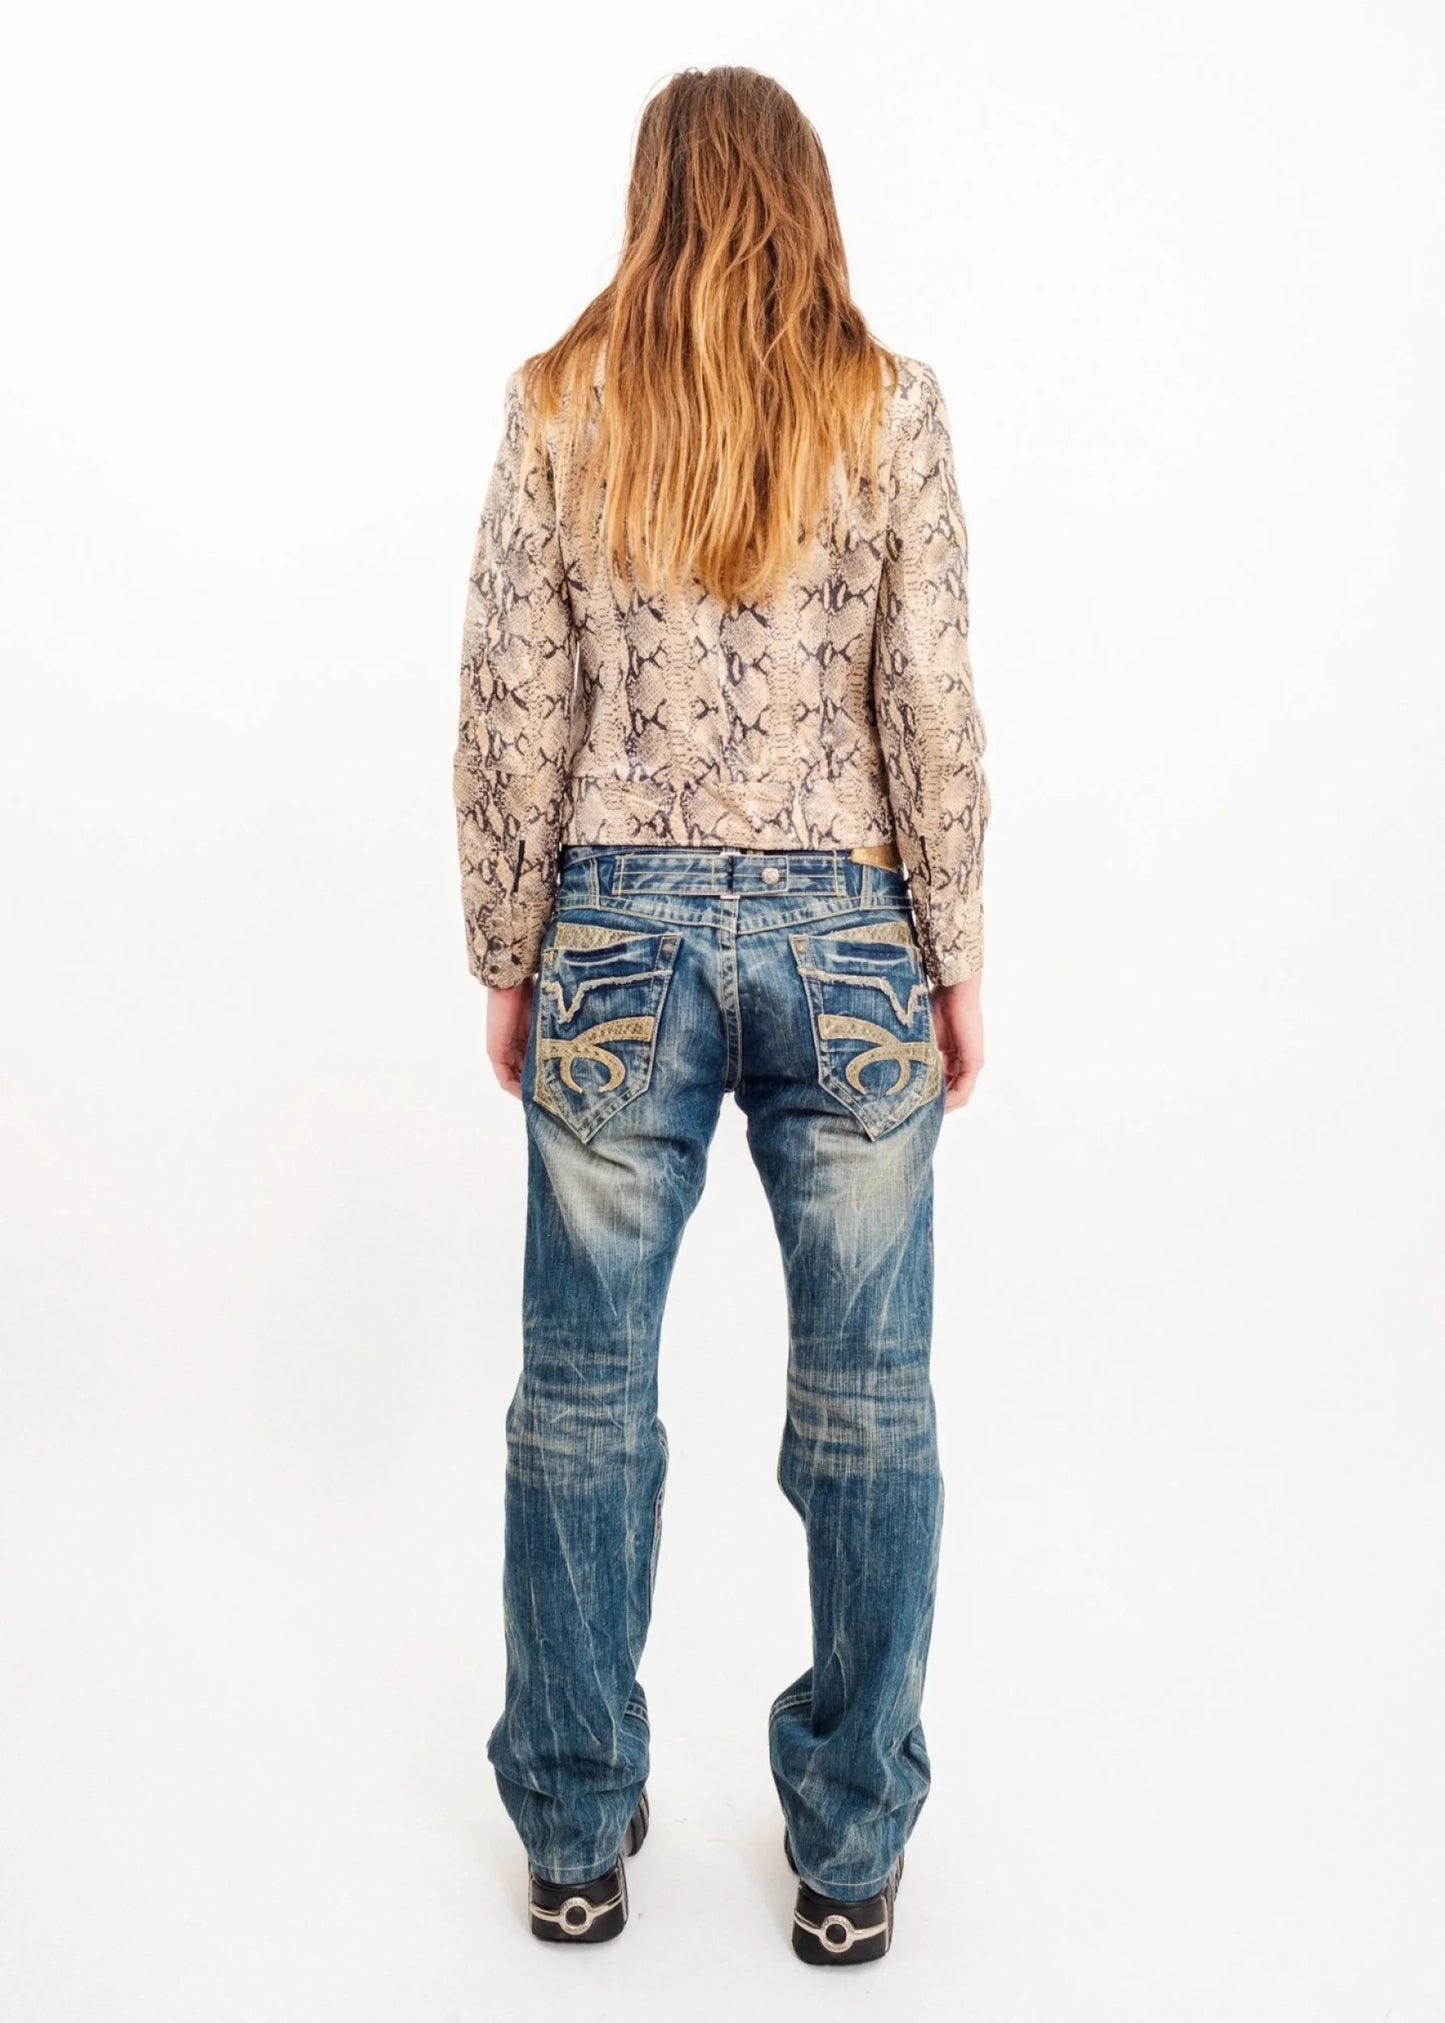 Red Pepper Engineered jeans with snakeskin accents